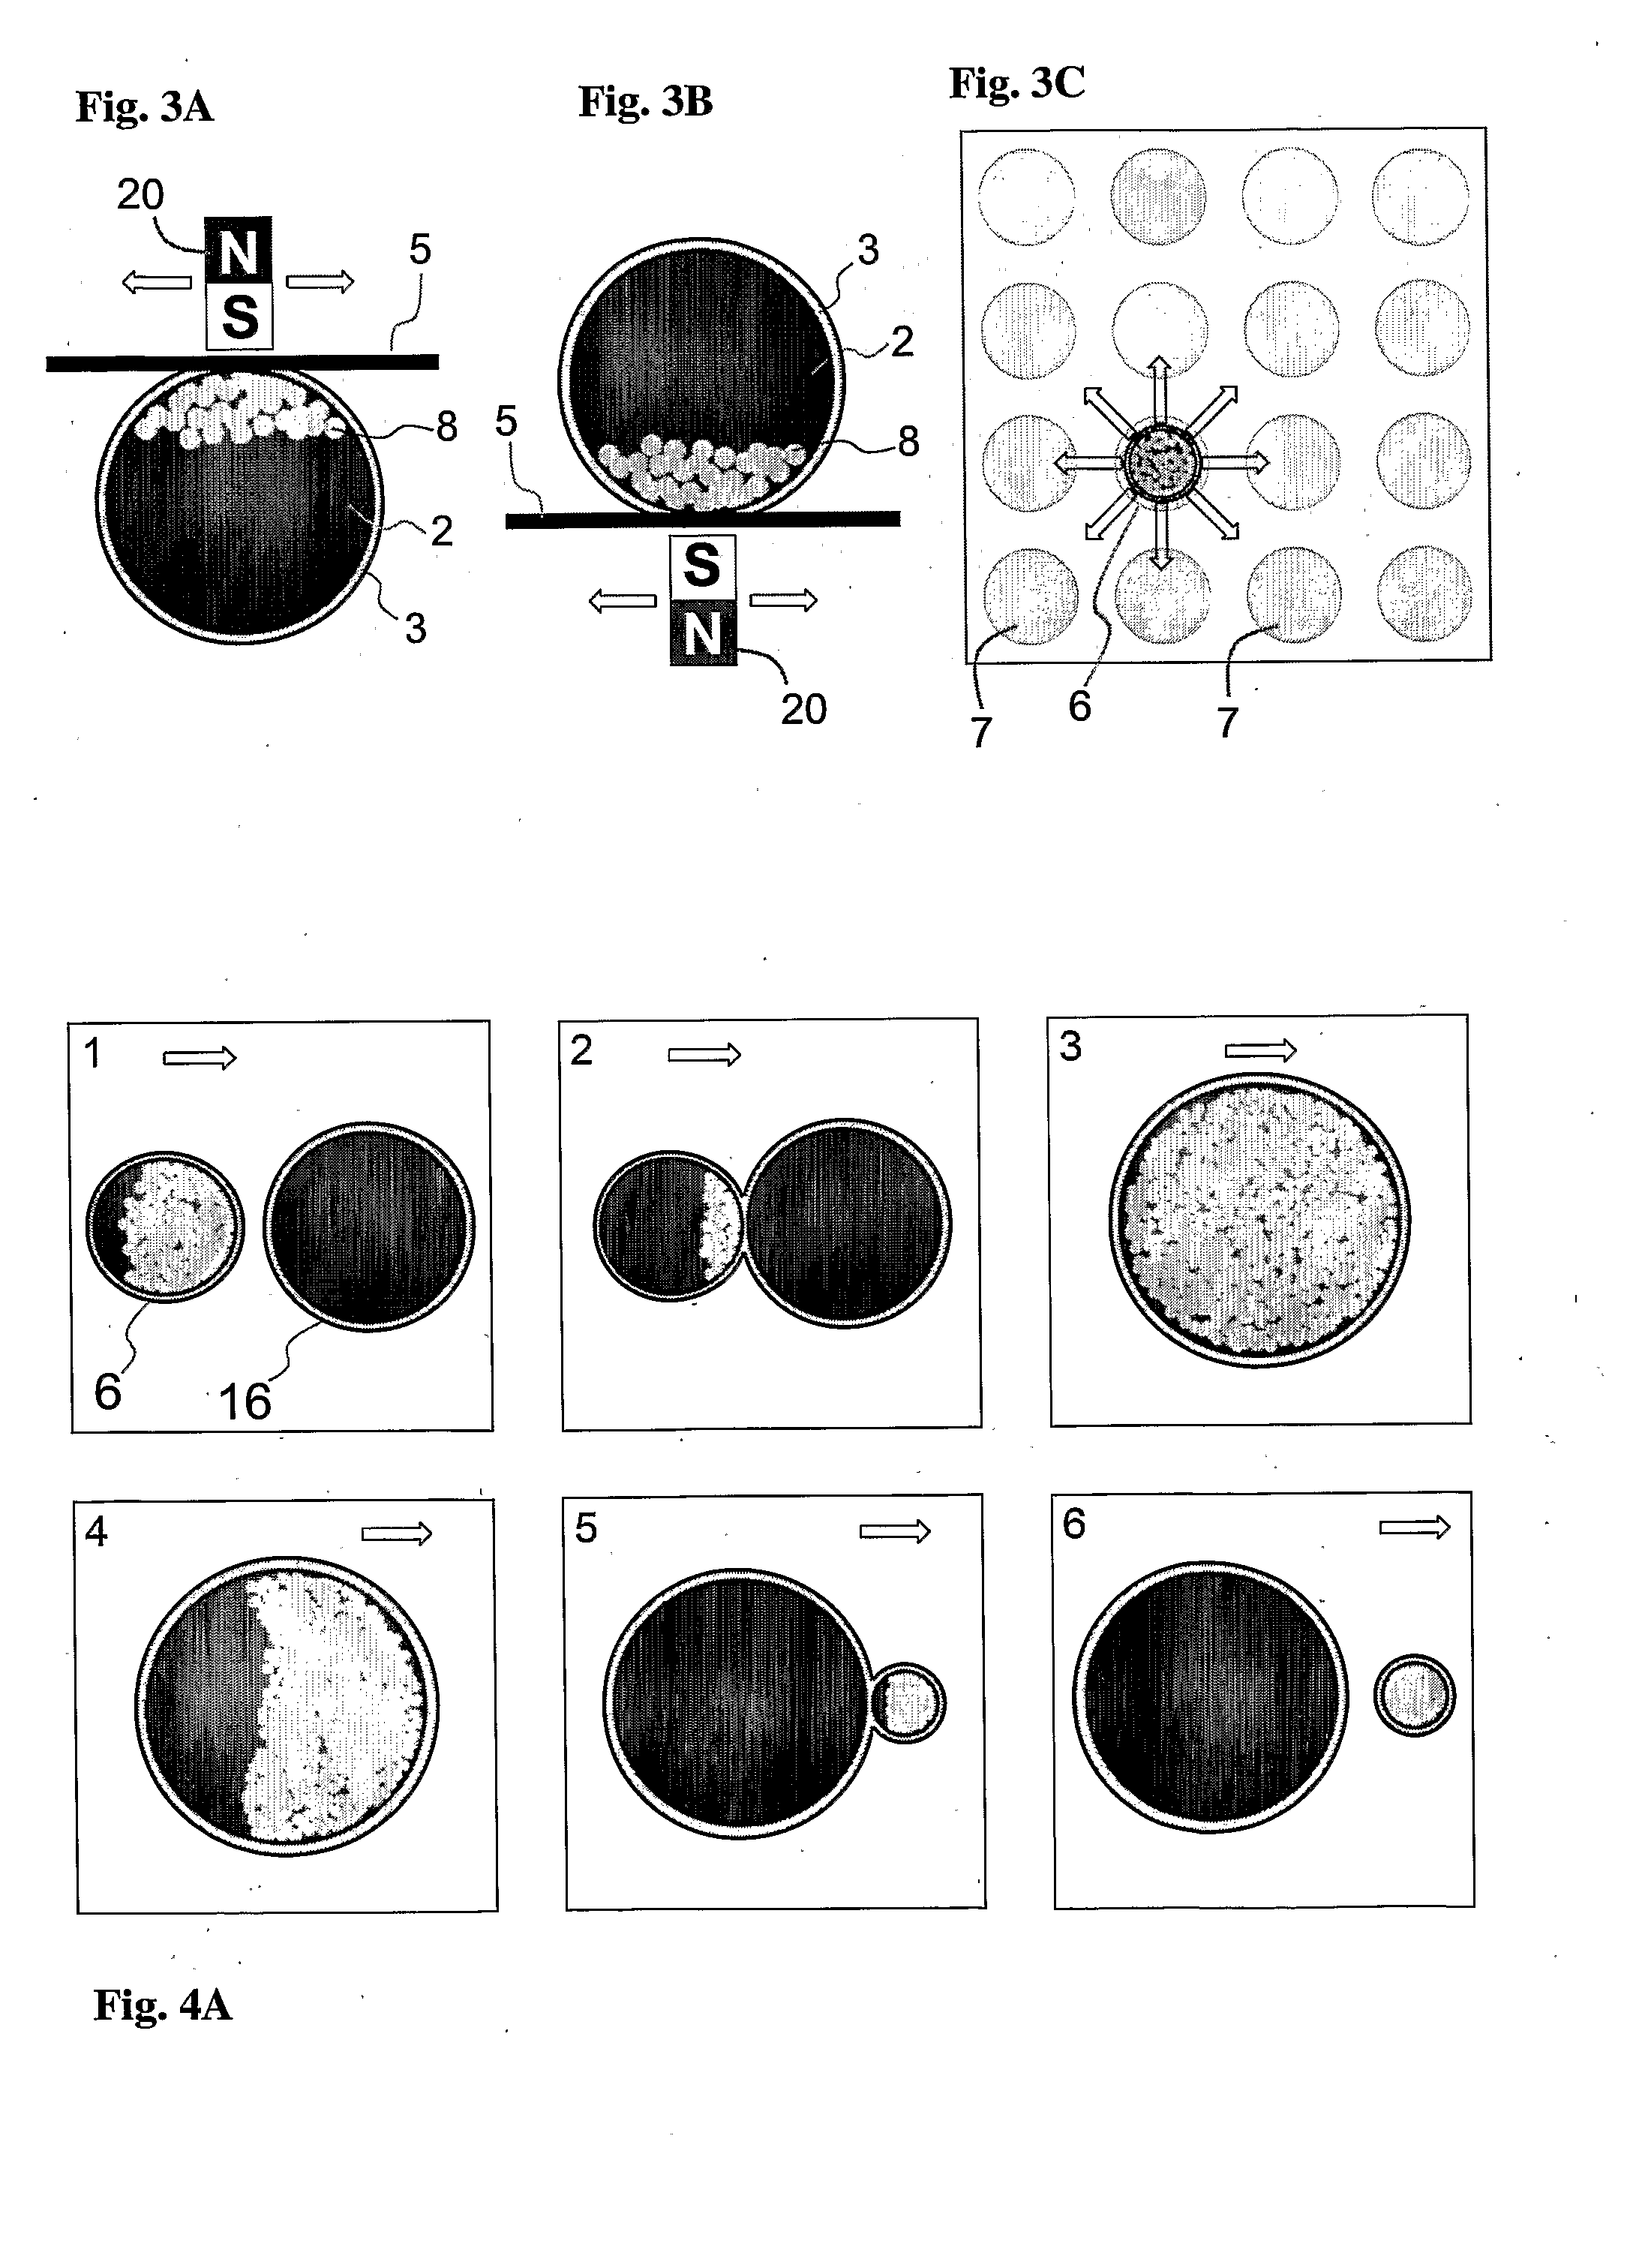 Method of processing a biological and/or chemical sample